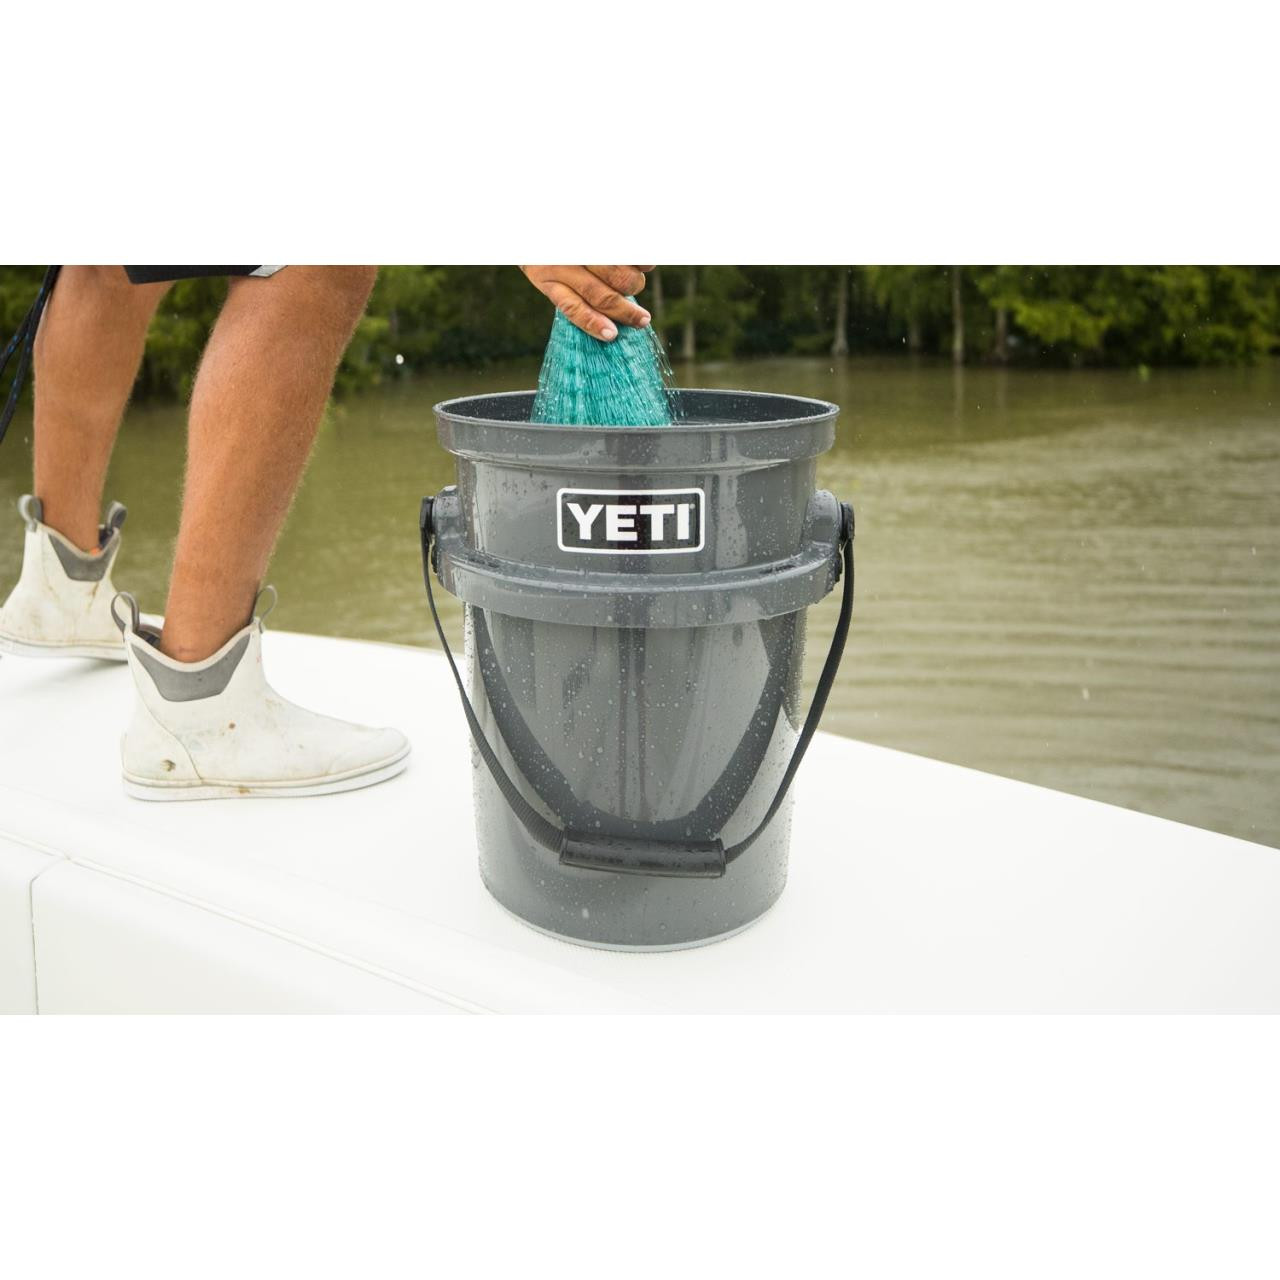 https://cdn11.bigcommerce.com/s-70mih4s/images/stencil/1280x1280/products/15296/37530/Yeti-Loadout-Bucket-Charcoal-888830028704_image1__91849.1505752853.jpg?c=2